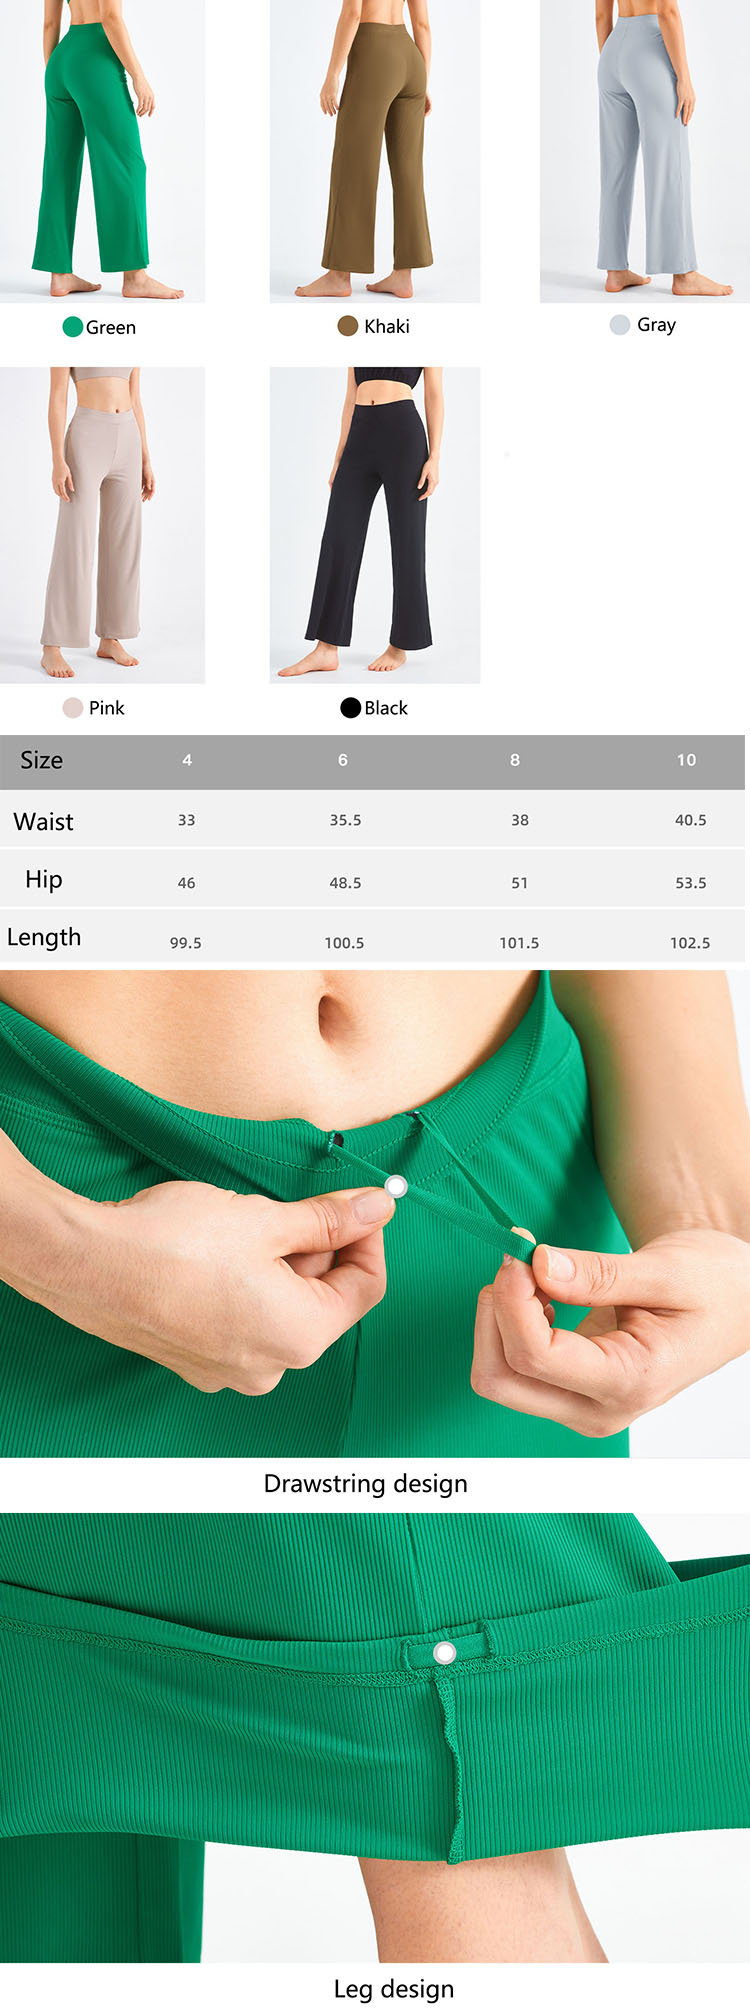 The waist is designed with a drawstring, which can be adjusted freely, making the movement more comfortable